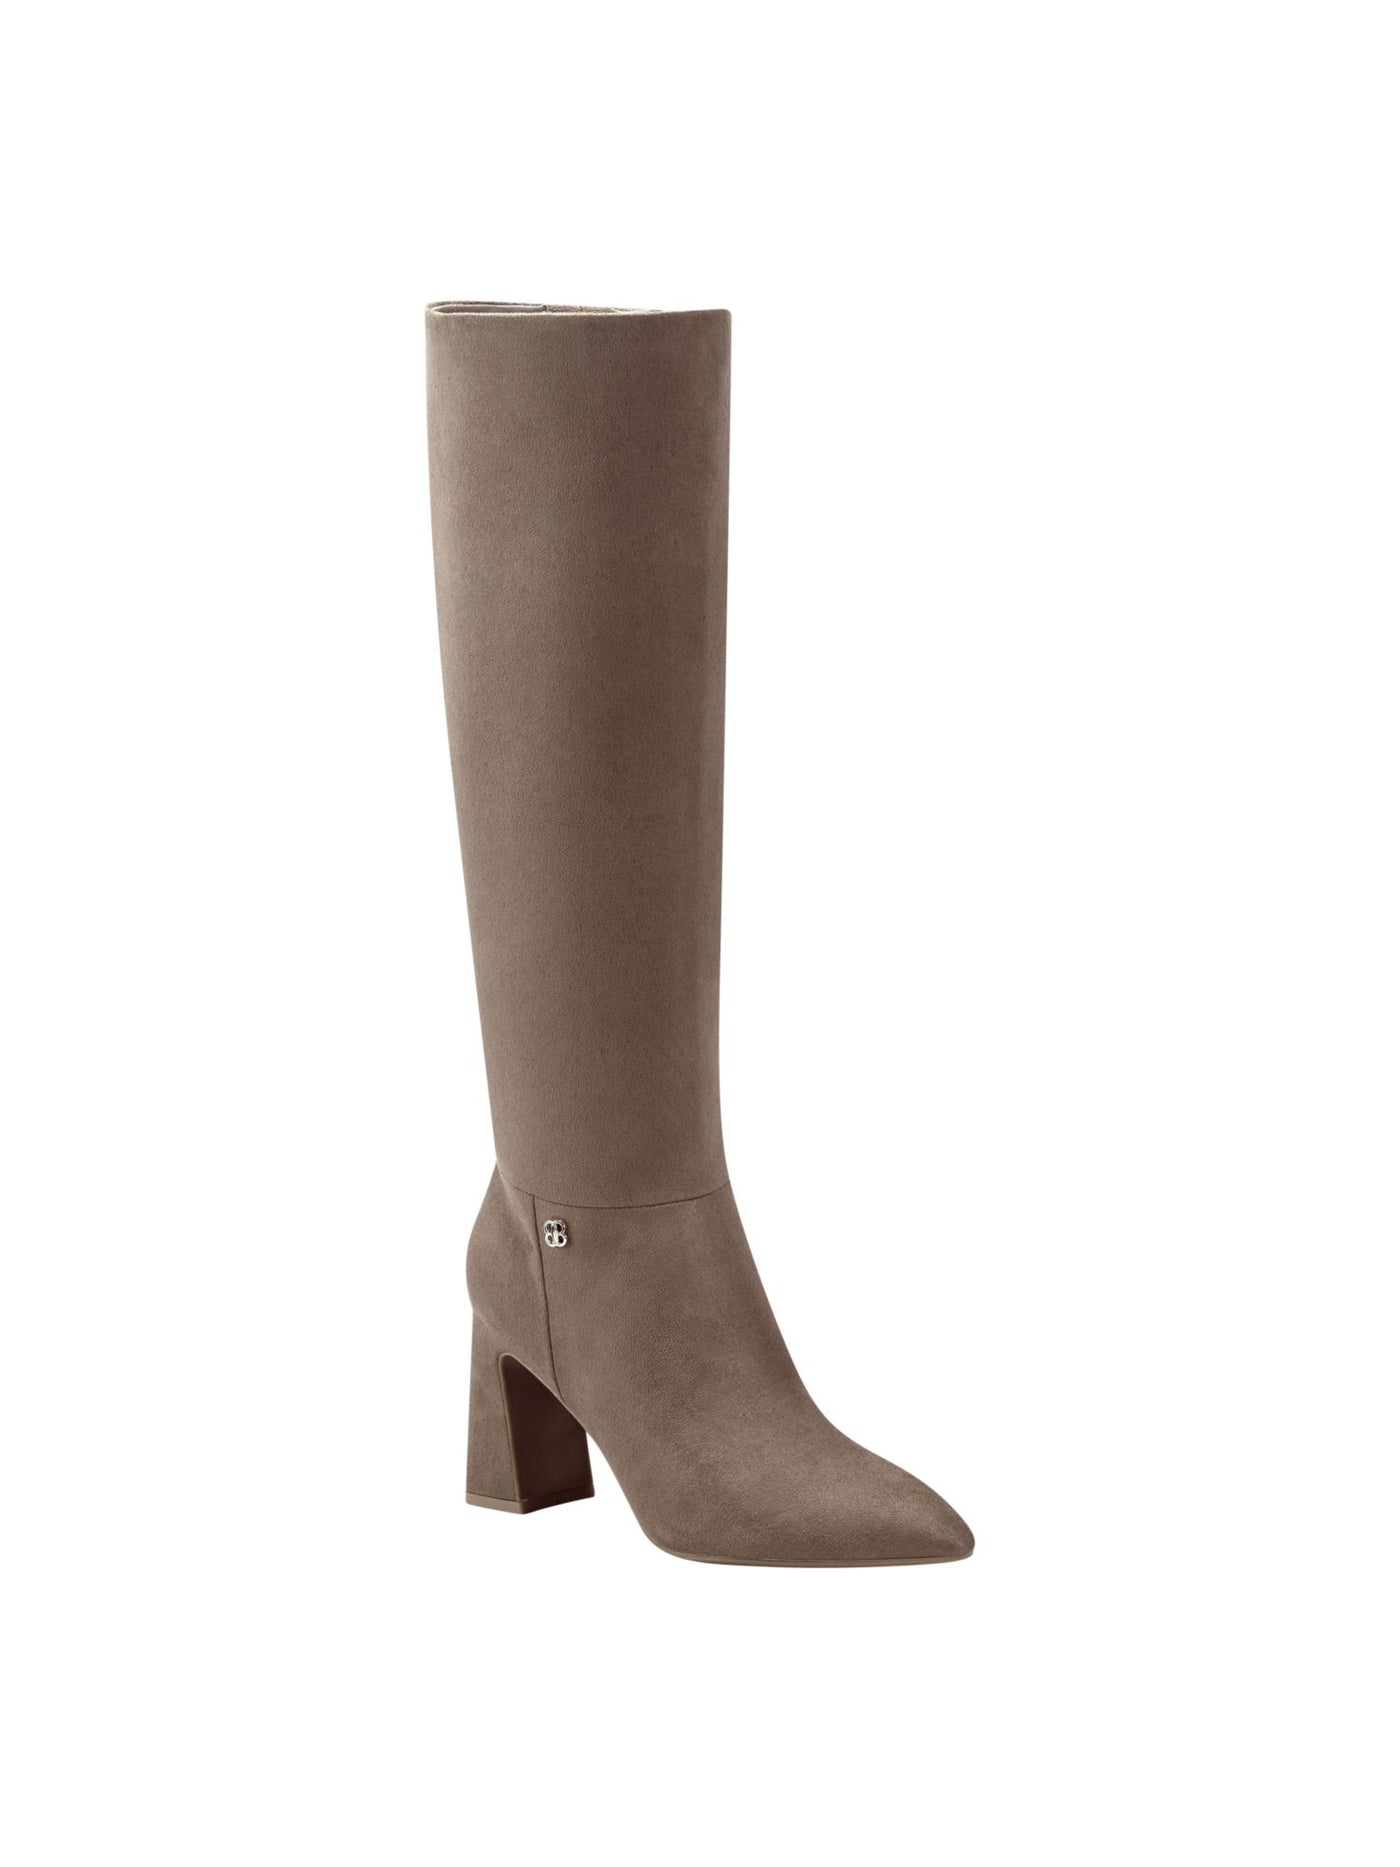 BANDOLINO Womens Beige Goring Padded Kyla Pointed Toe Sculpted Heel Zip-Up Dress Boots 6.5 M